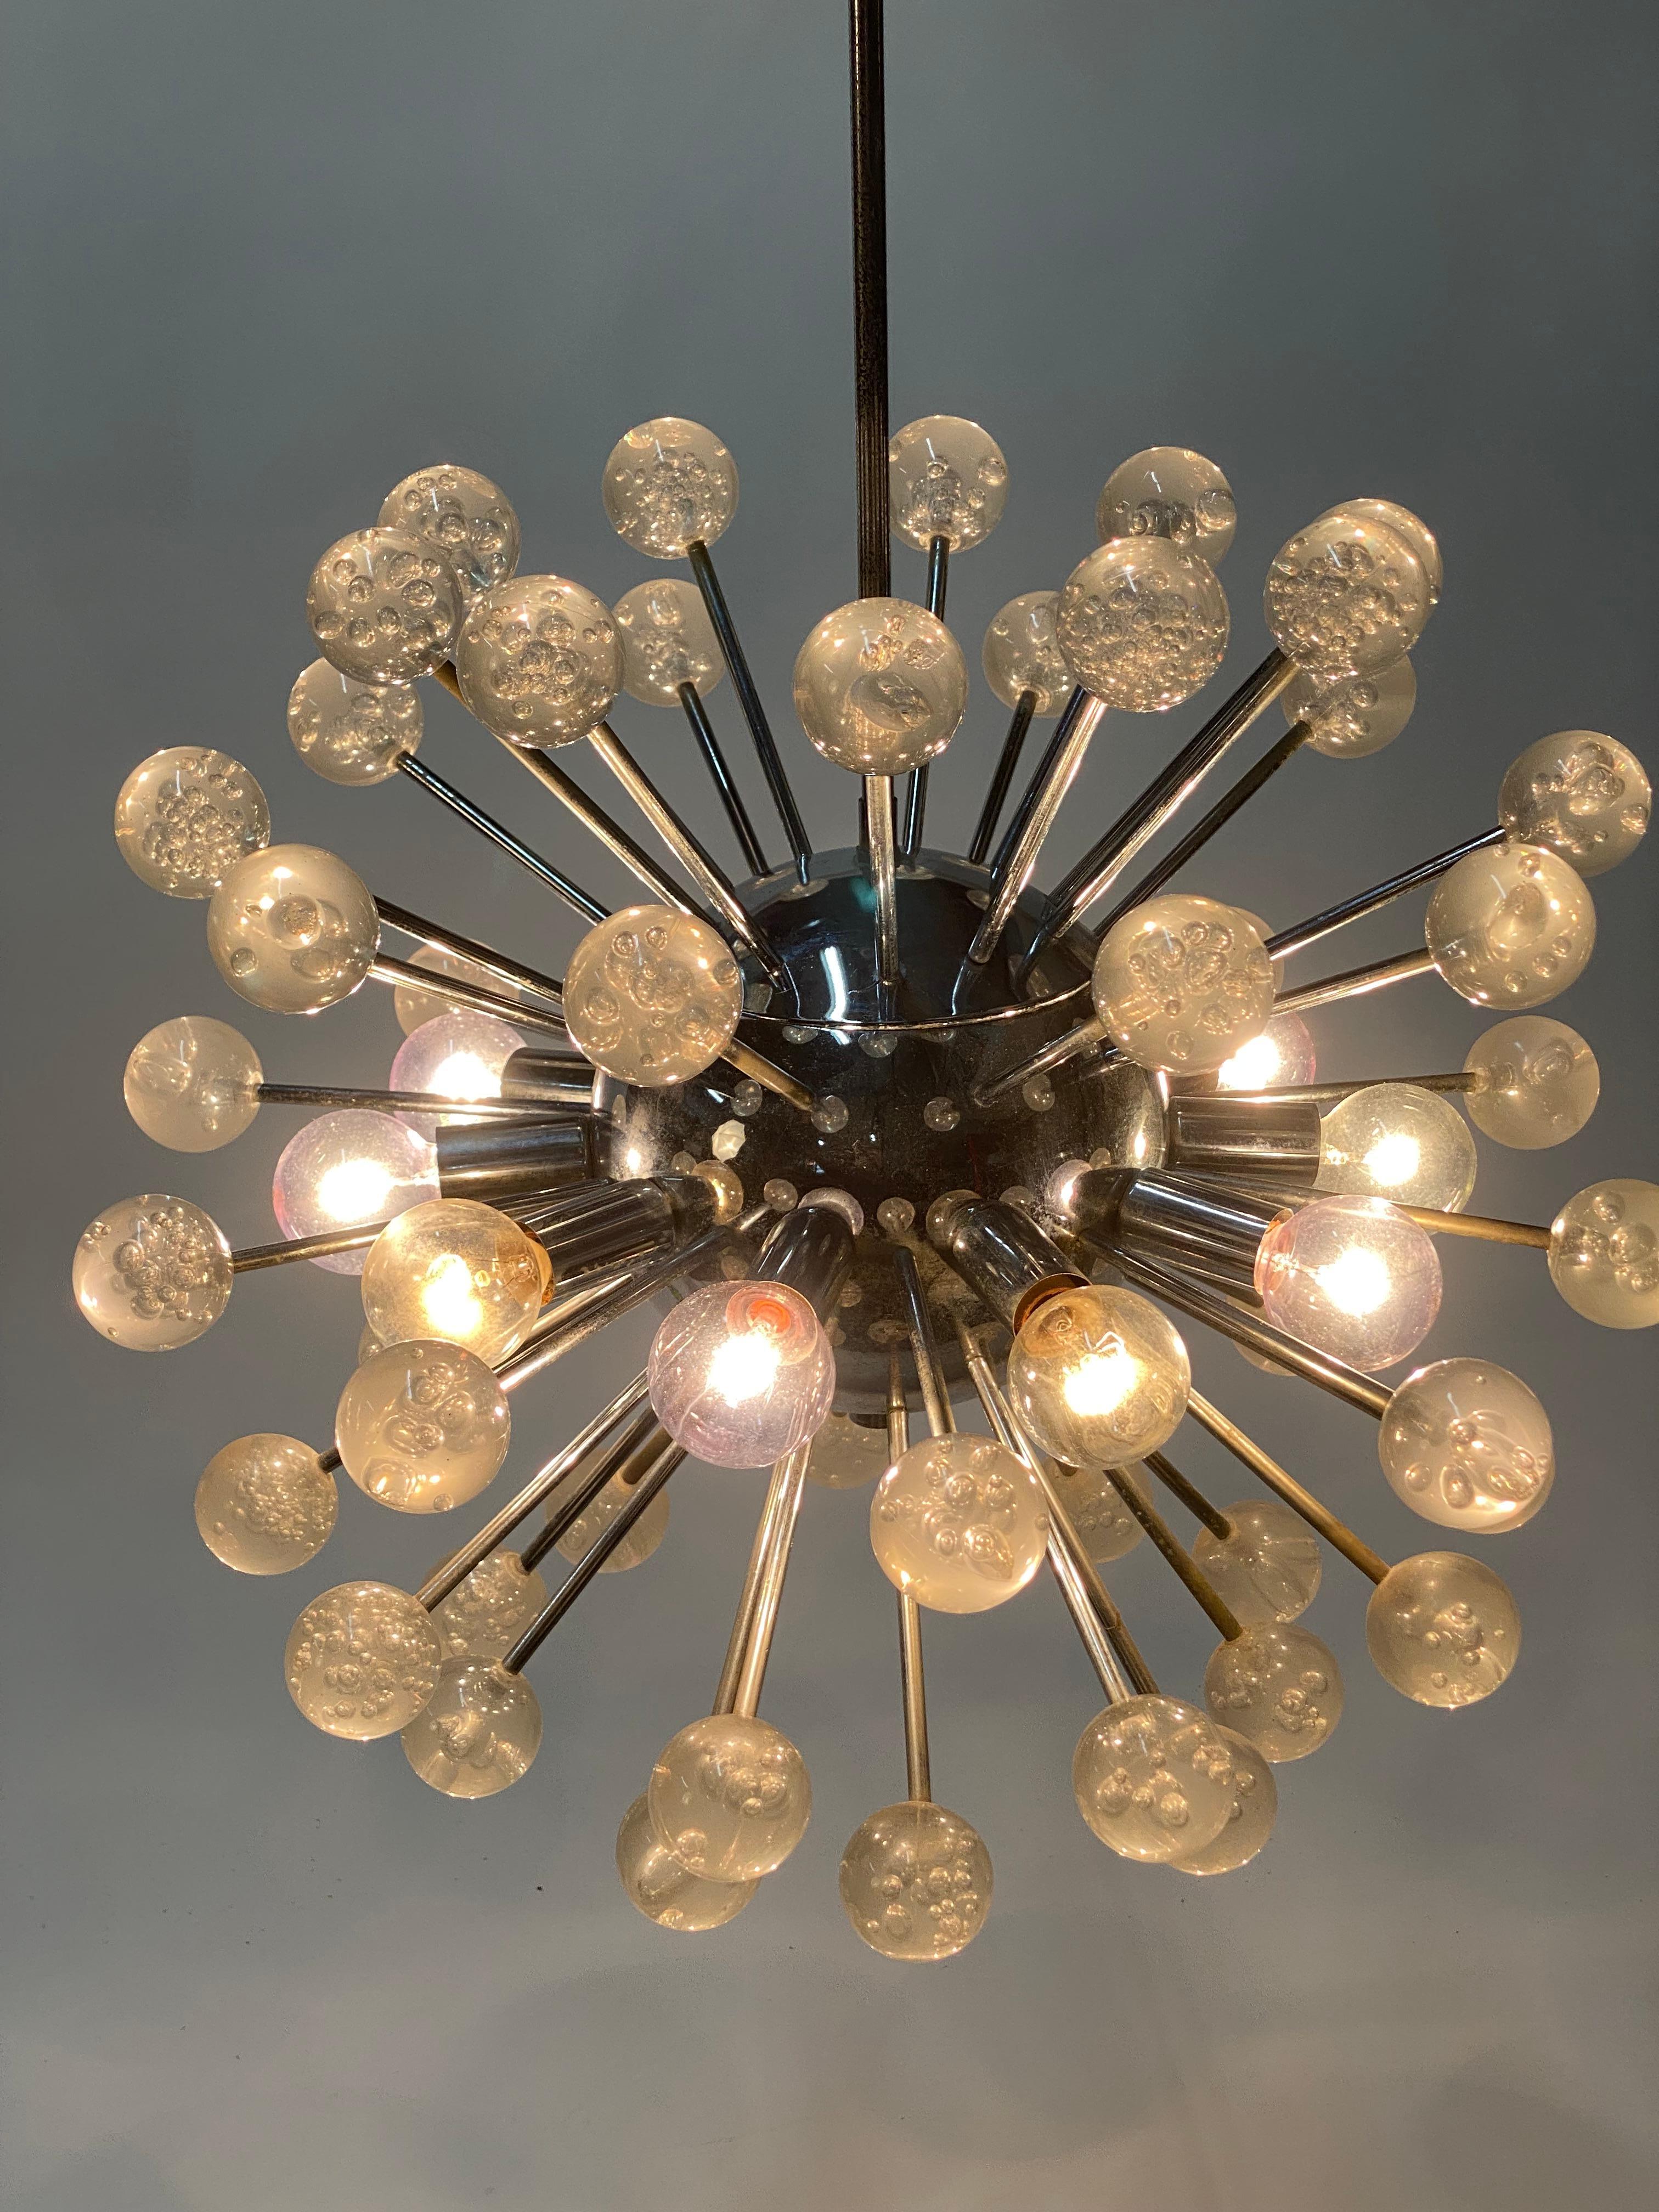 Chrome and Lucite space age chandelier. Circa late 1960s-70s. A chrome plated sphere with outreaching arms that end in bubble filled lucite balls. The middle portion is adorned with light bulbs. The lucite balls do not light up. A light fixture that